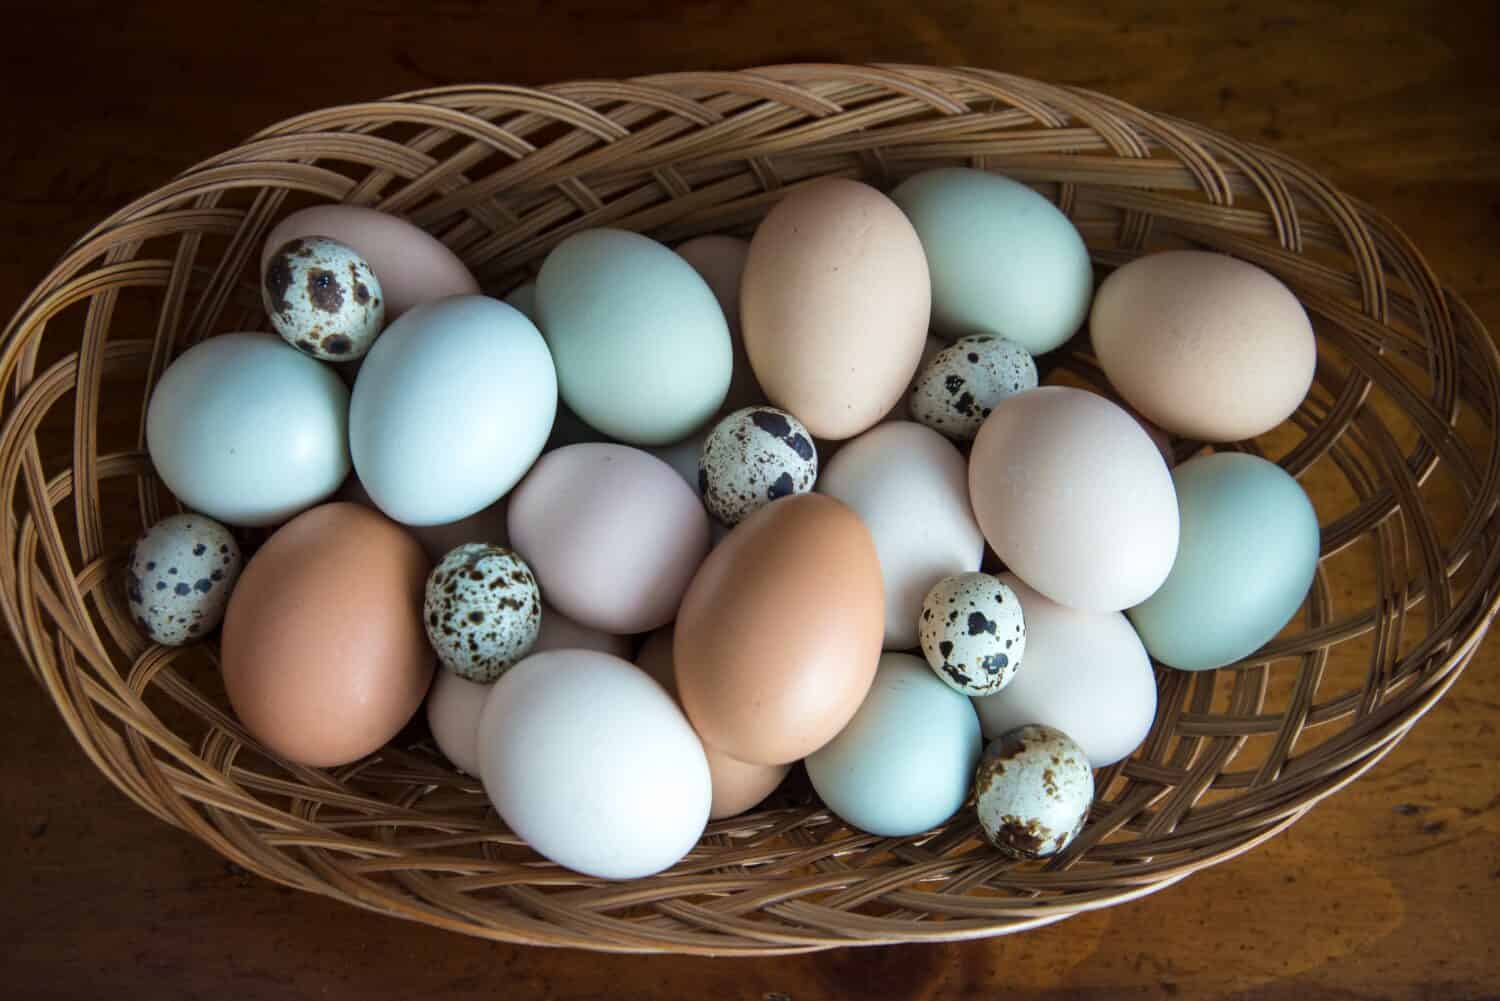 multicolored chicken hen eggs and spotted quail eggs in a basket on wooden background table